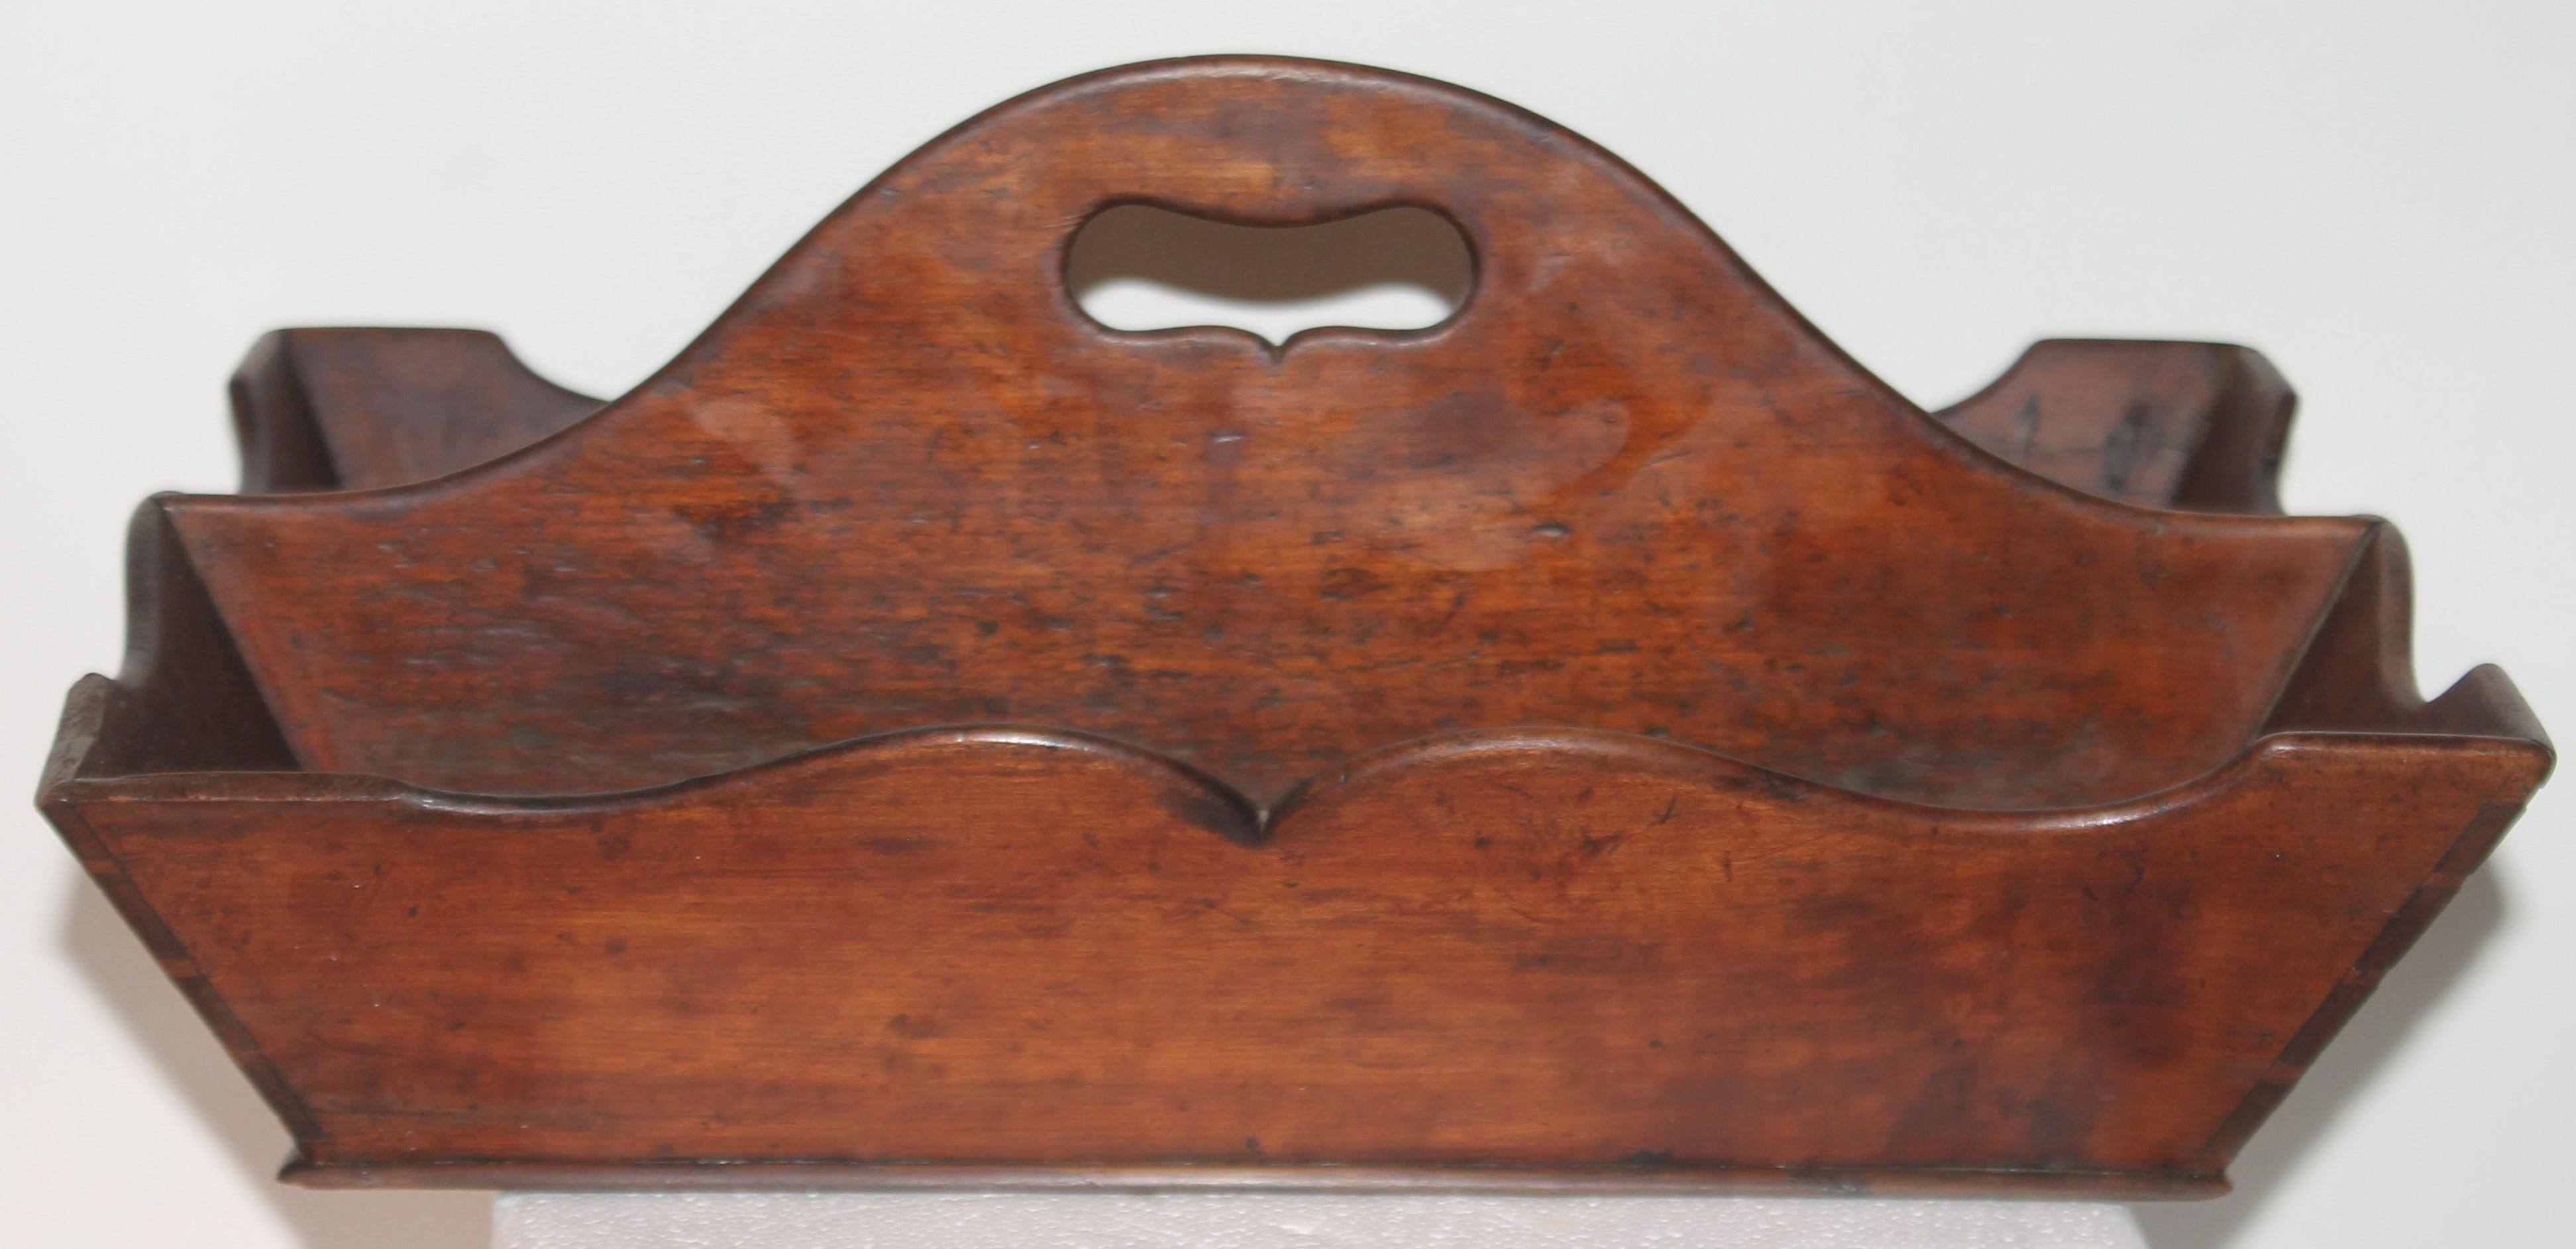 Early 19th C Cutlery tray w/ Scallop Edges. Hand crafted. Good Condition.